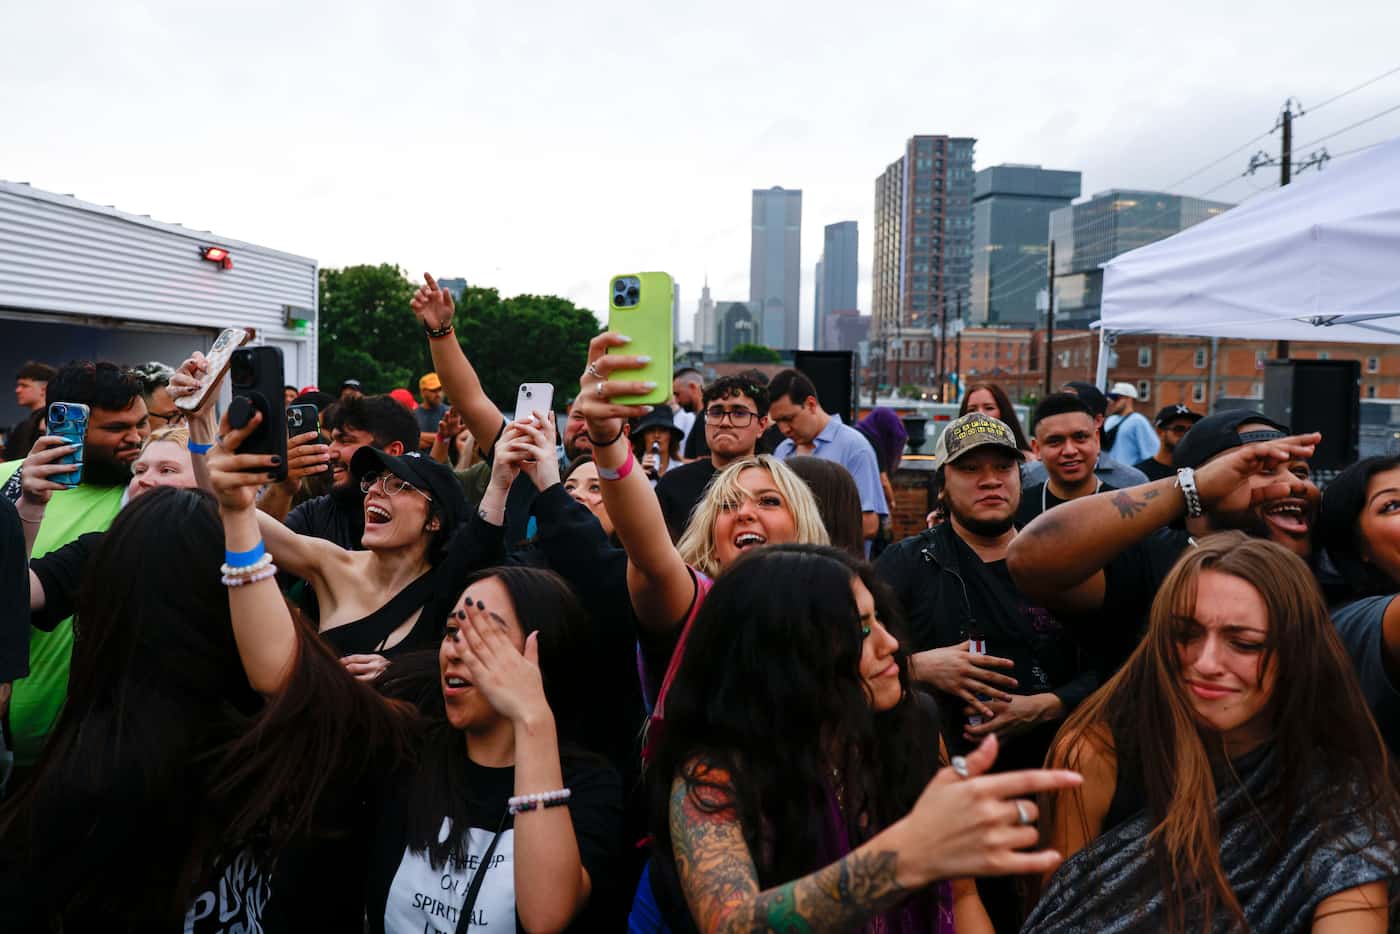 Crowd dances during a surprise pop up show with DJ Svdden Death and Marshmello, on Friday,...